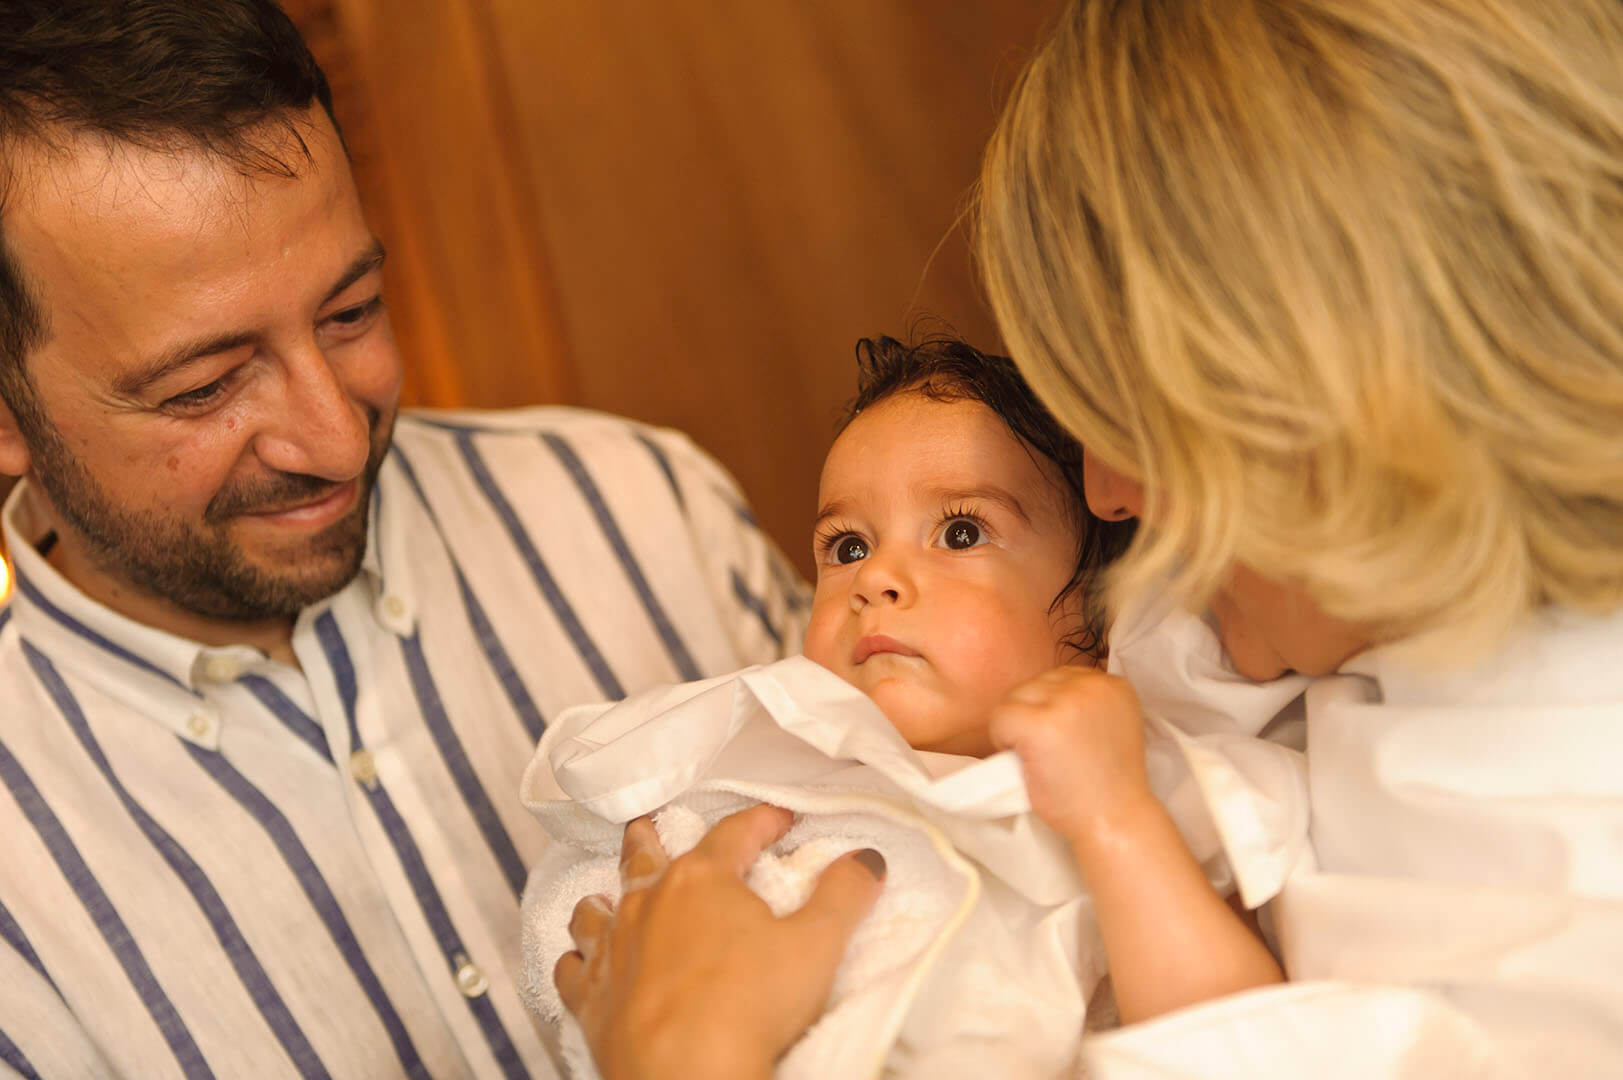 Joyful family moment: Tenderness fills the air as parents embrace their baptized child.